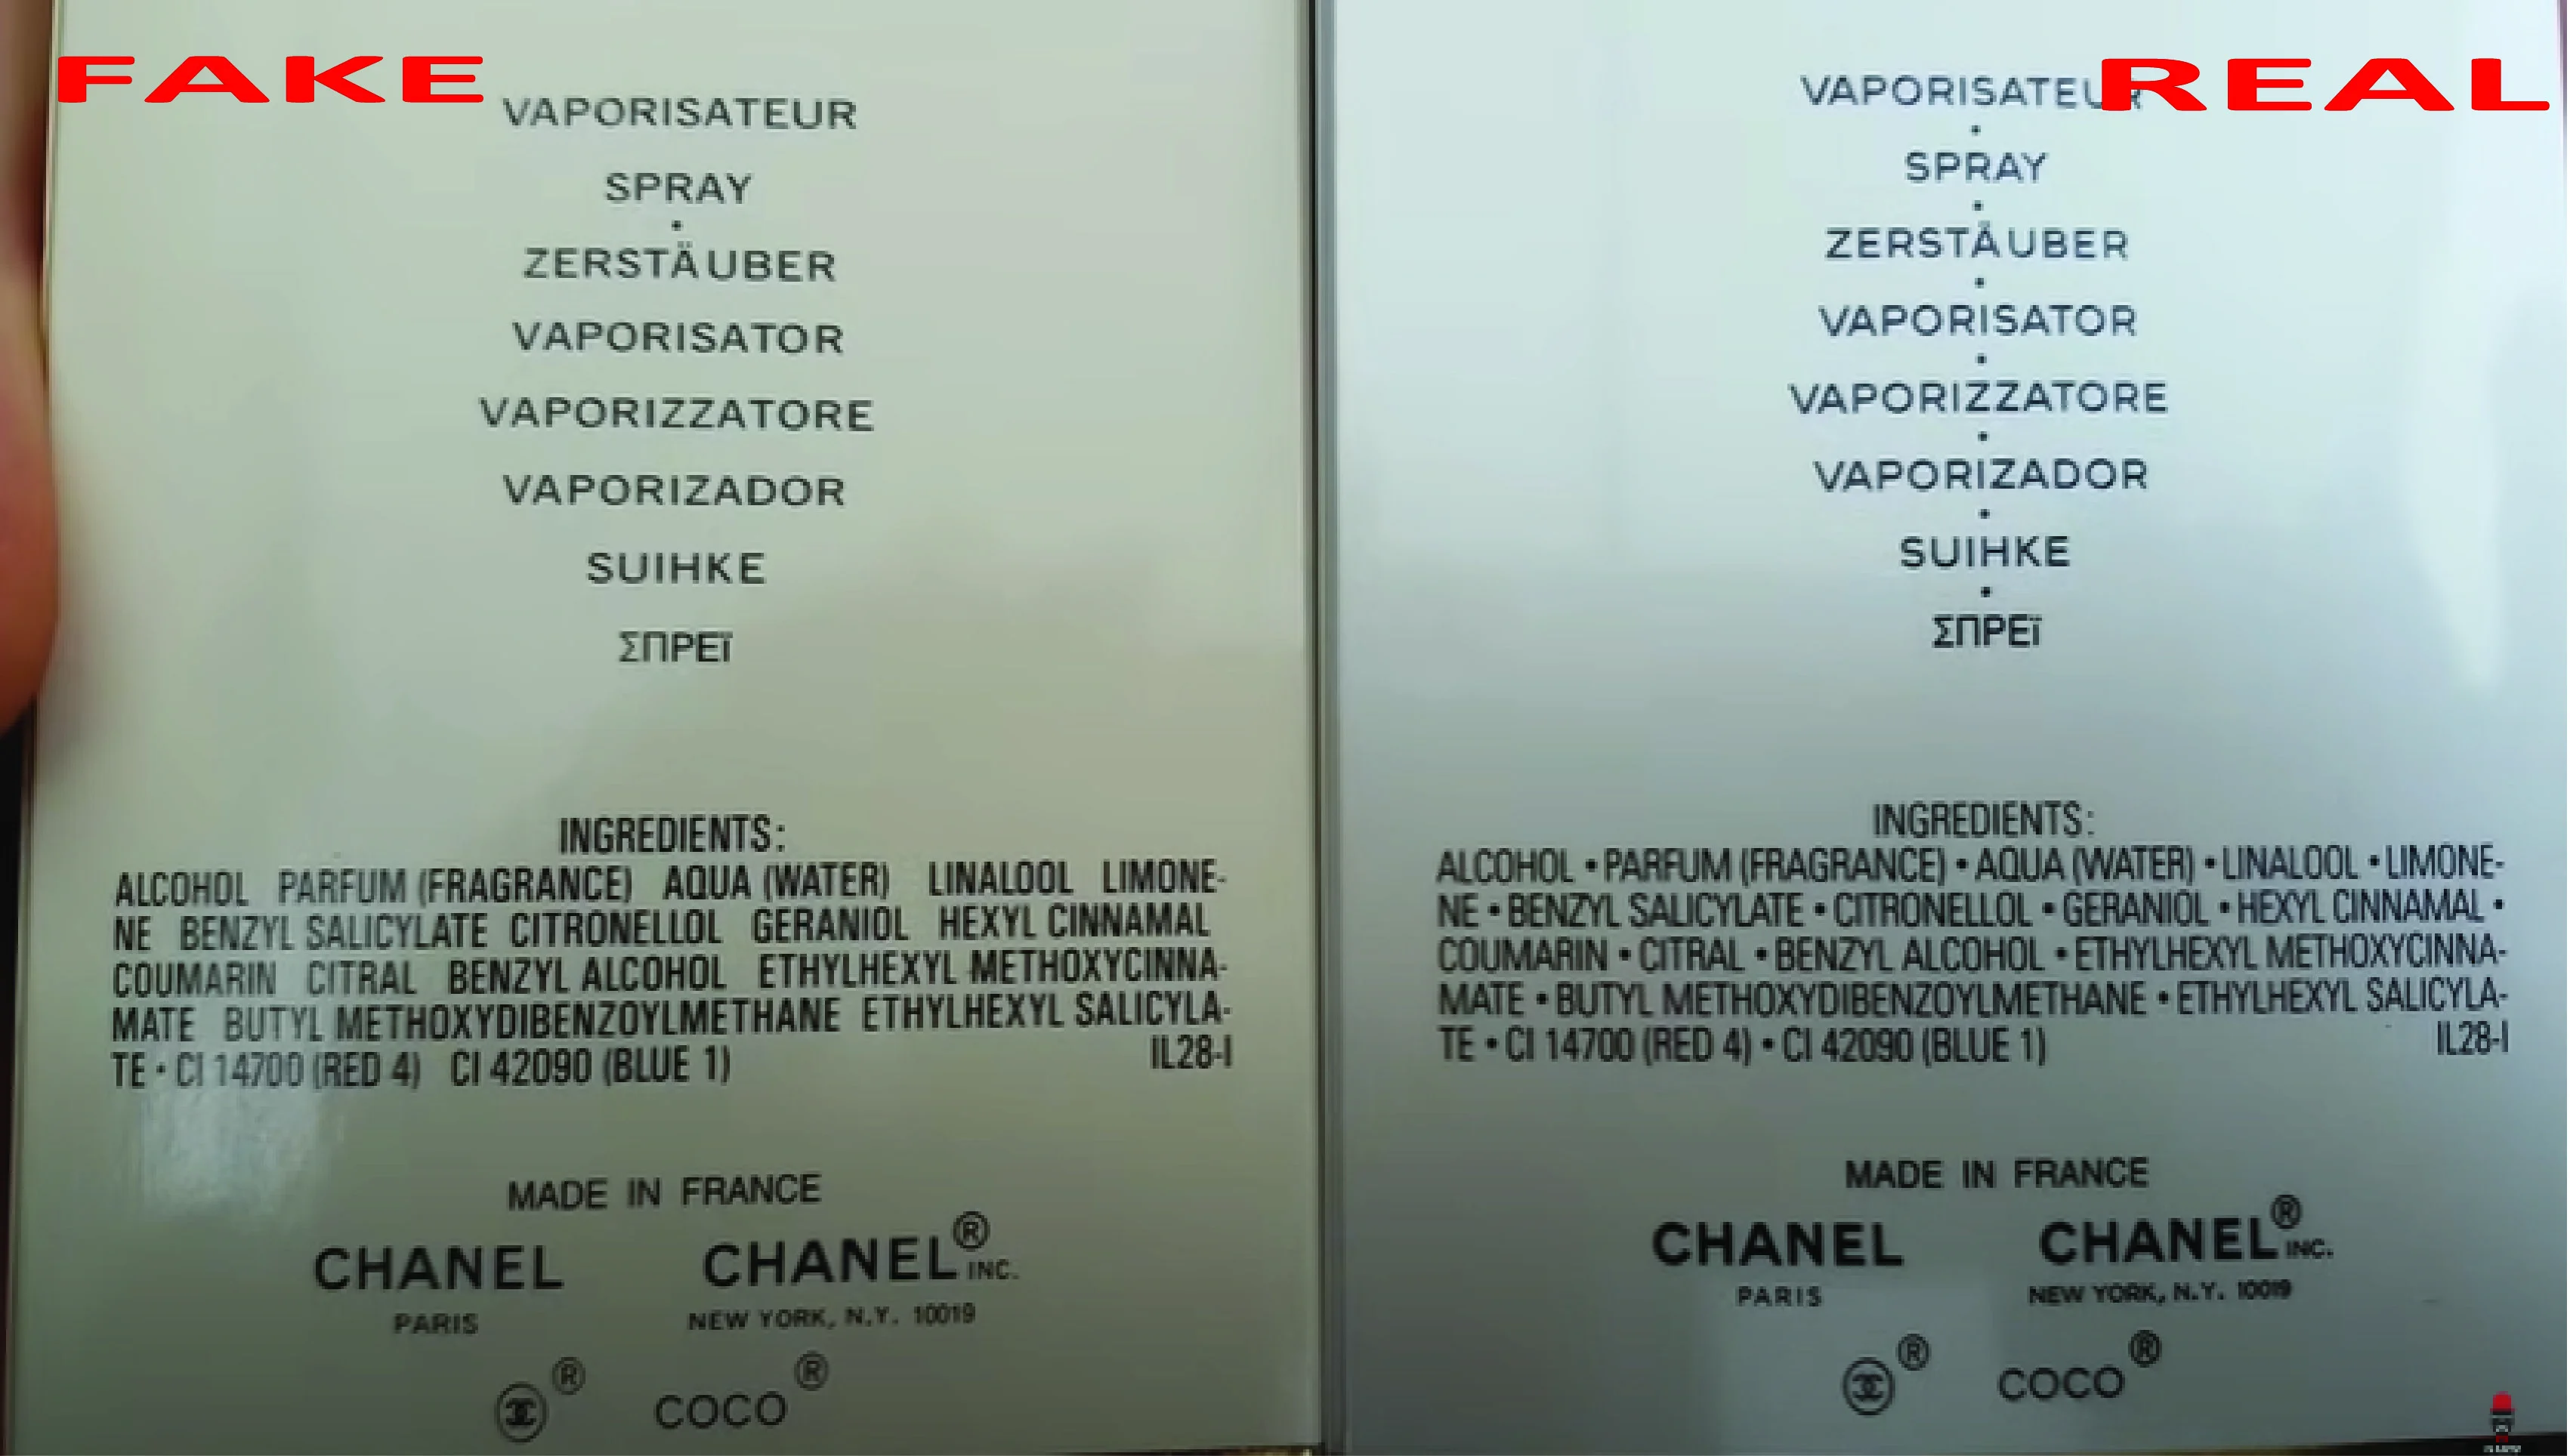 The back  packaging of real vs. fake Chanel mademoiselle perfume